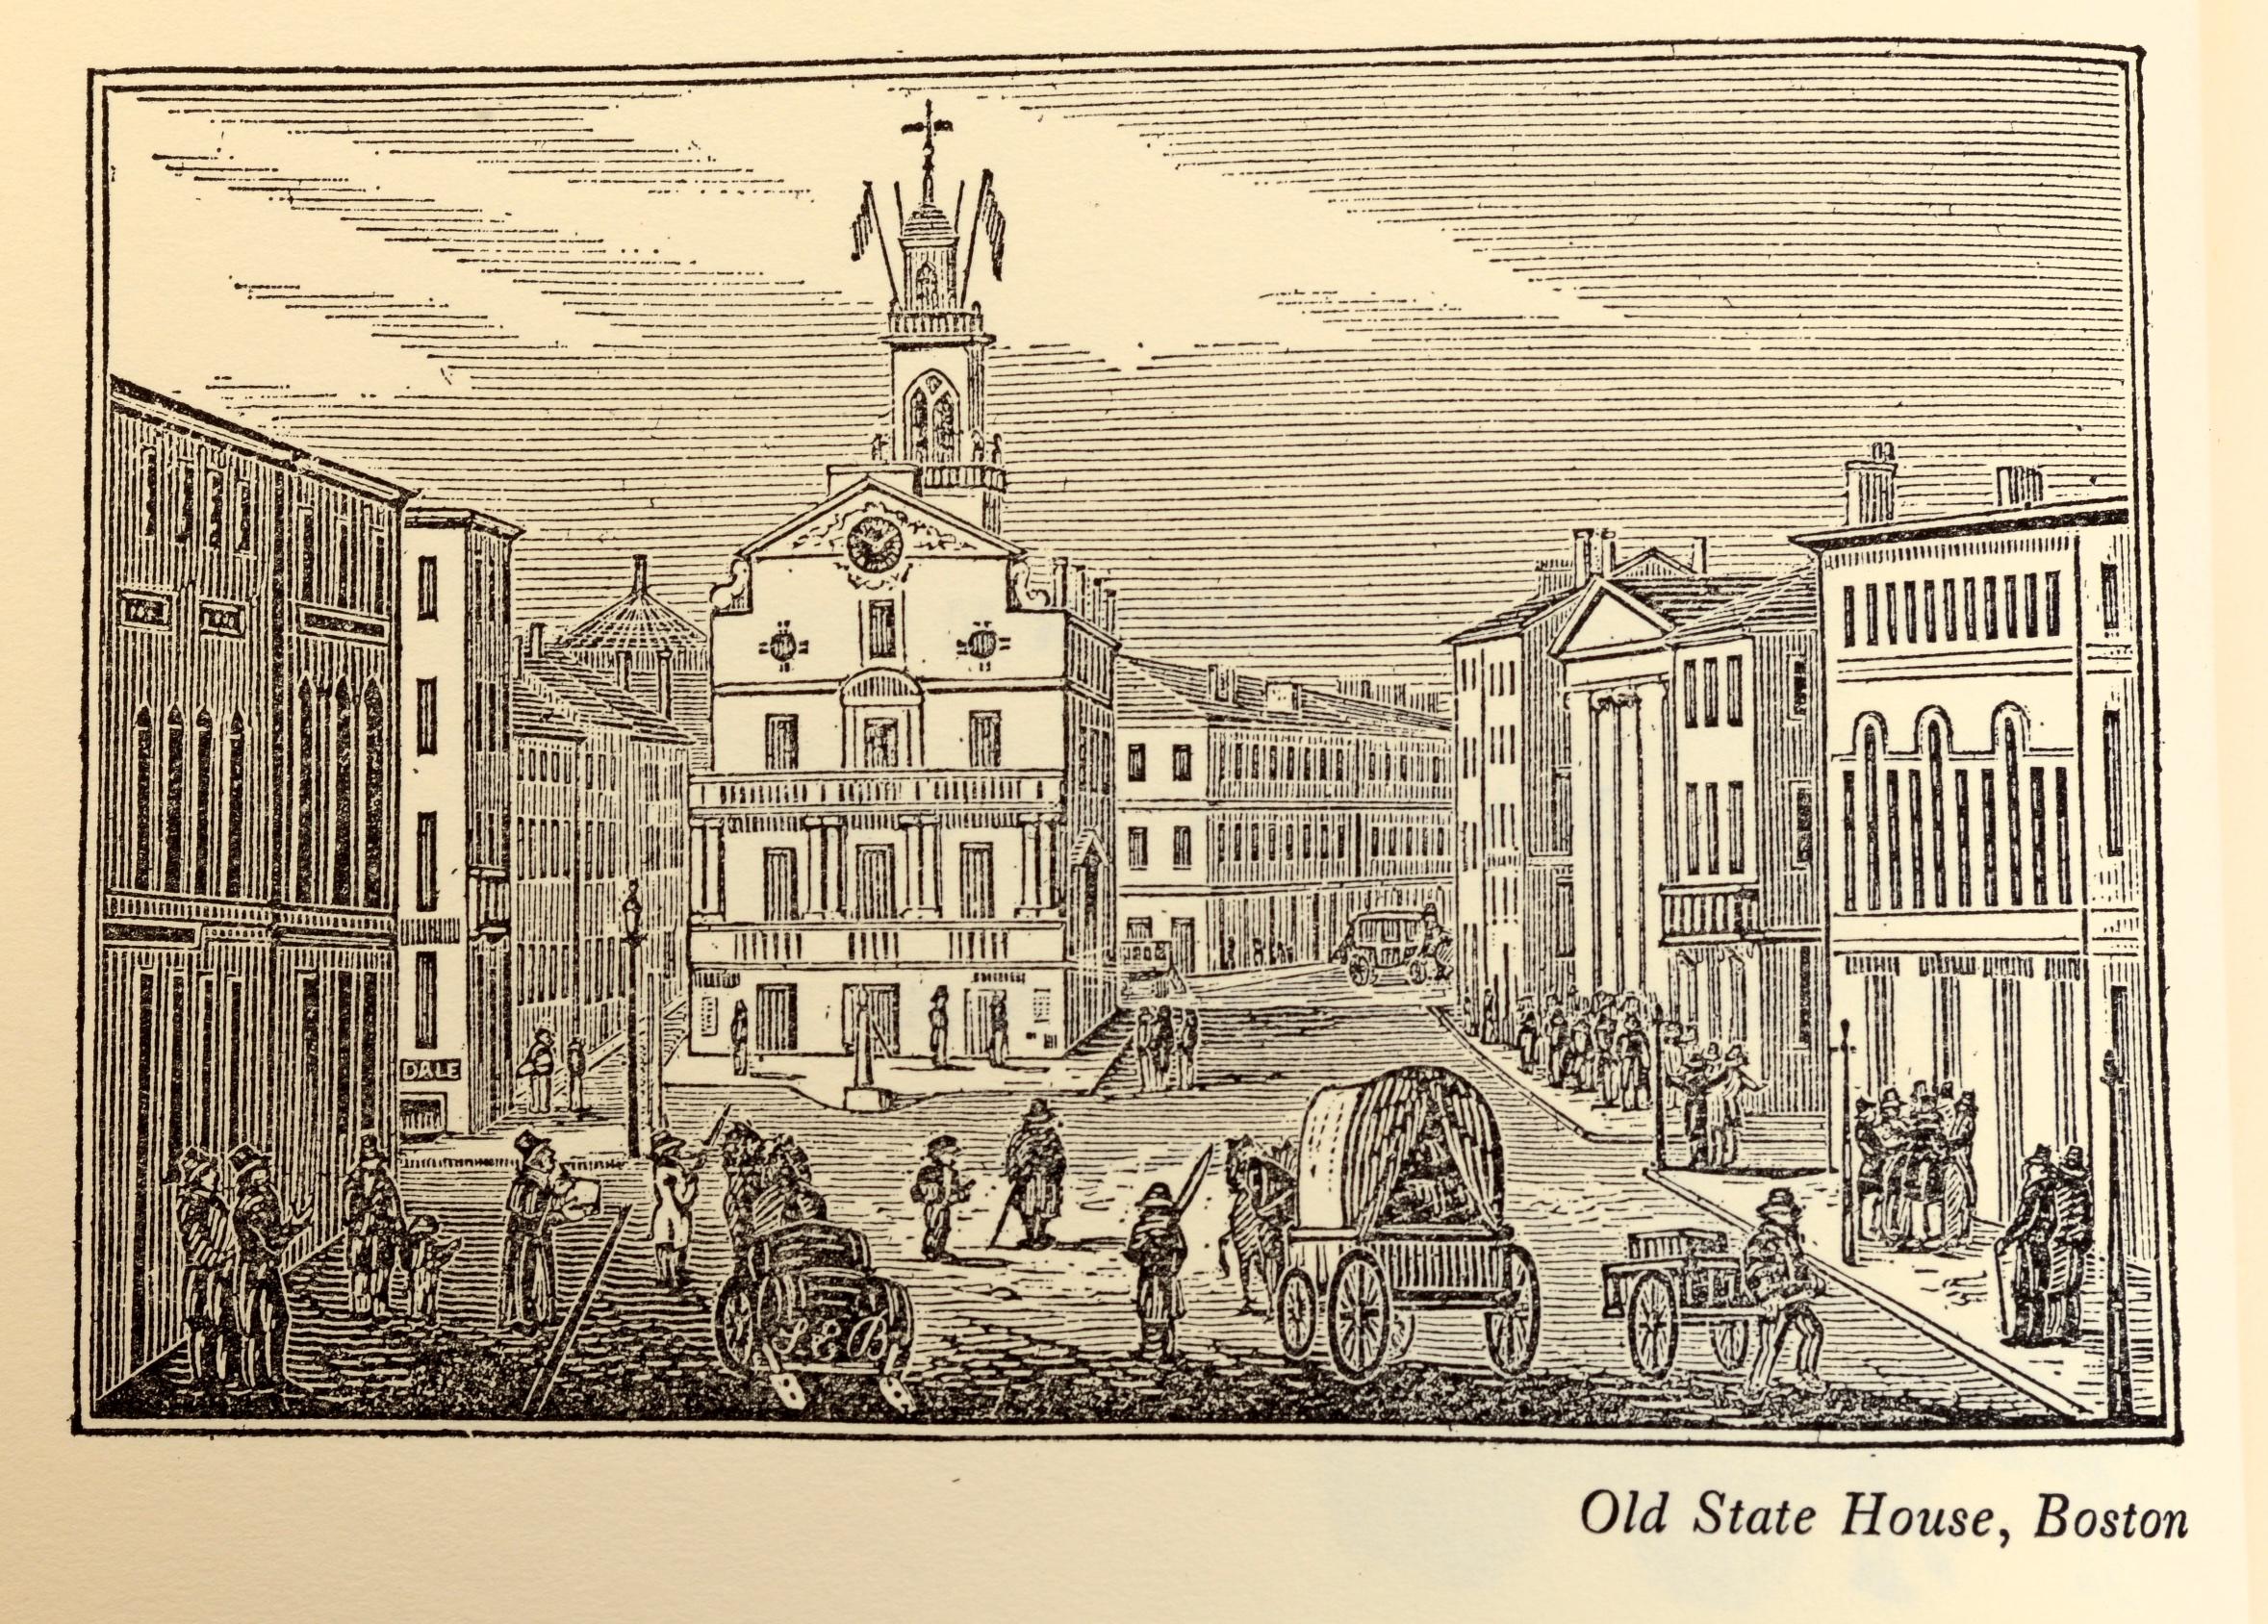 American More Massachusetts Towns, Illustrated with Wood Engravings of 53 Mass. Towns For Sale